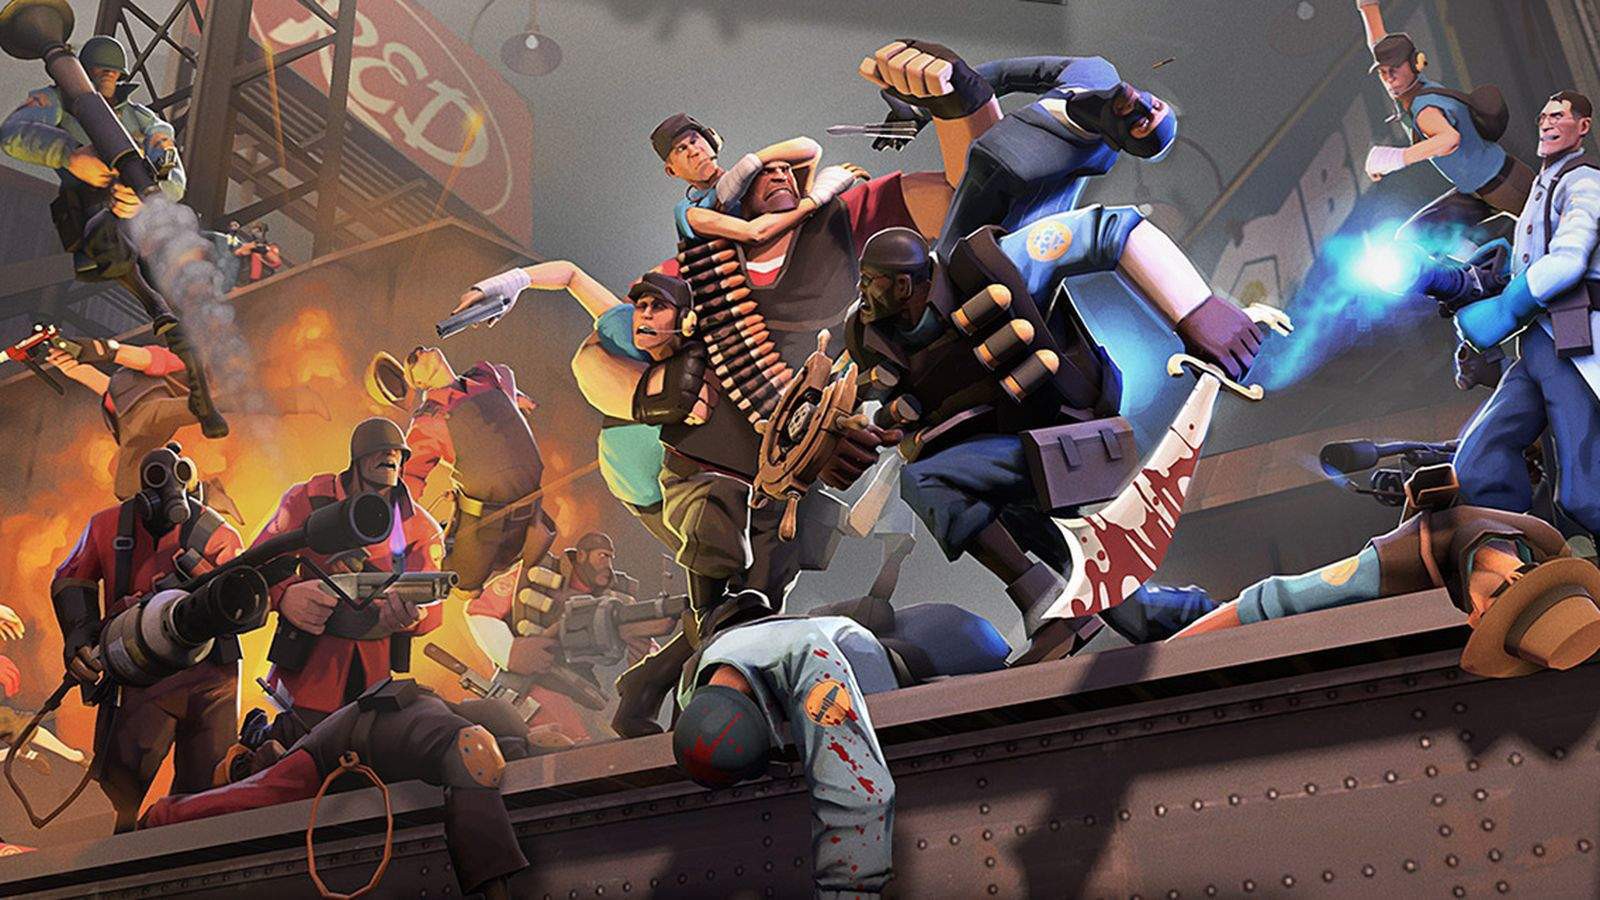 Games With Hidden Backstories - Team Fortress 2 and Generations of Conflict